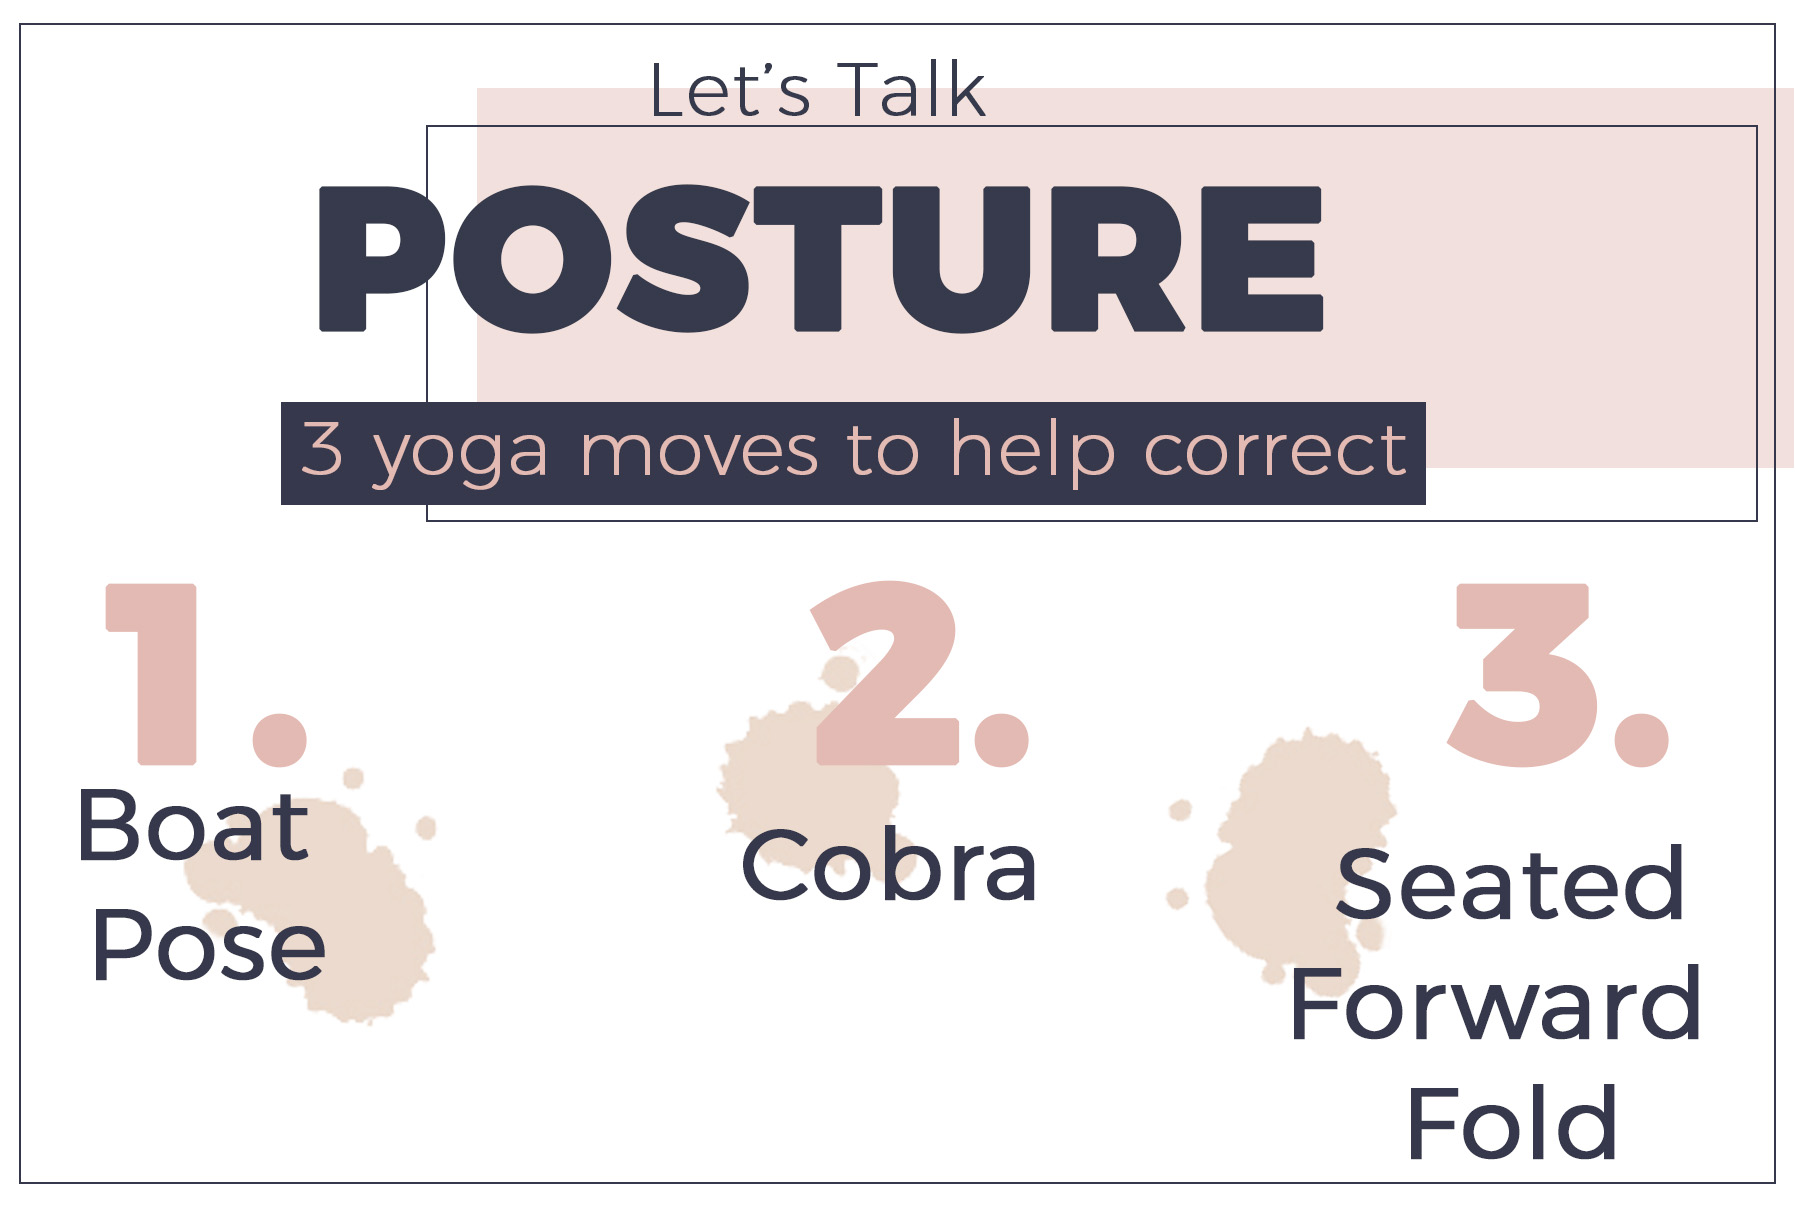 Tips to improve your posture